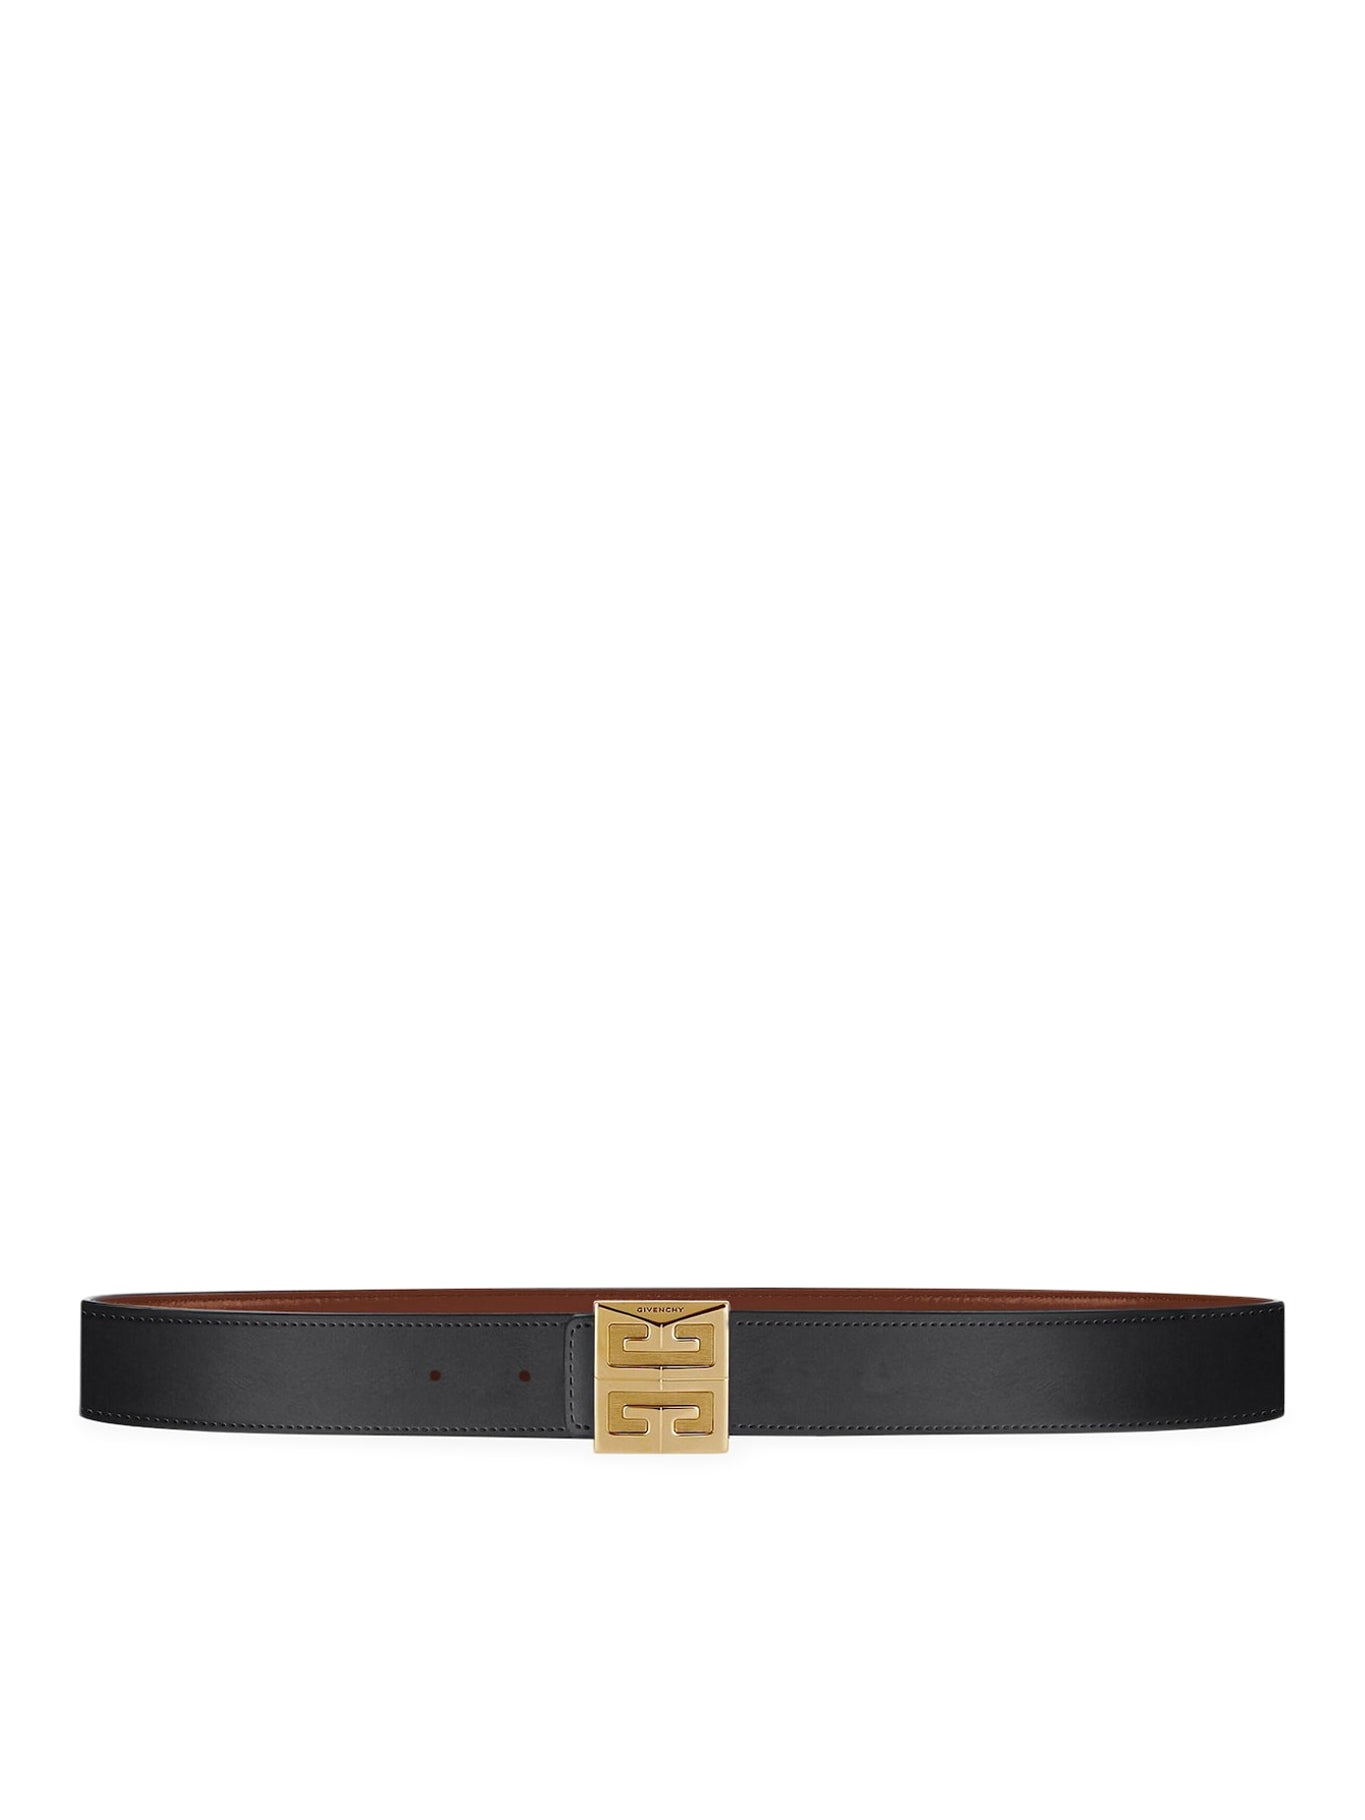 Shape leather belt Louis Vuitton Brown size 100 cm in Leather